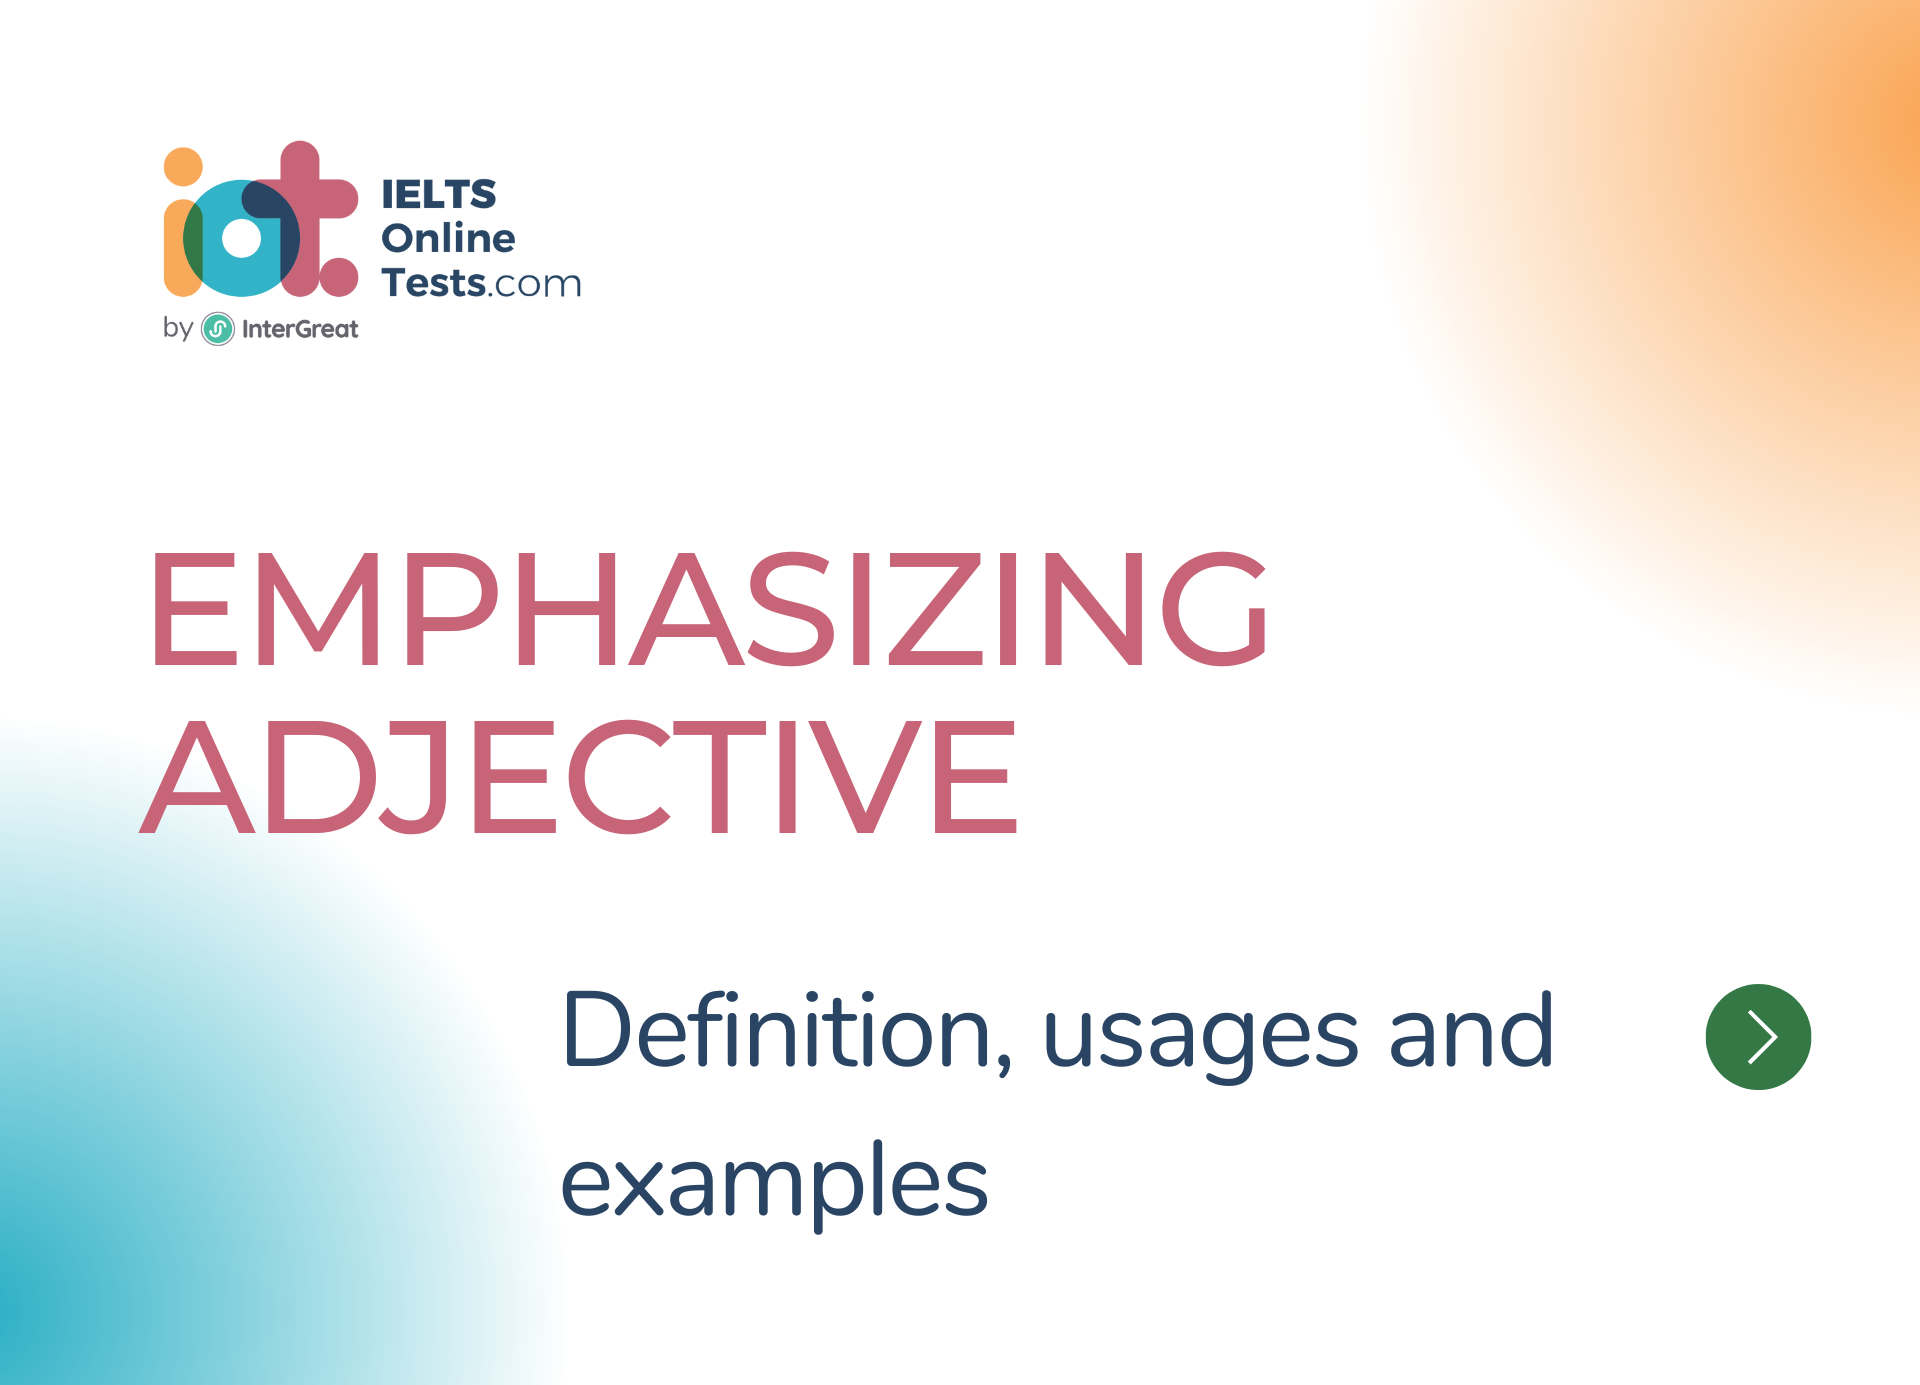 emphasizing-adjective-definition-usages-and-examples-ielts-online-tests